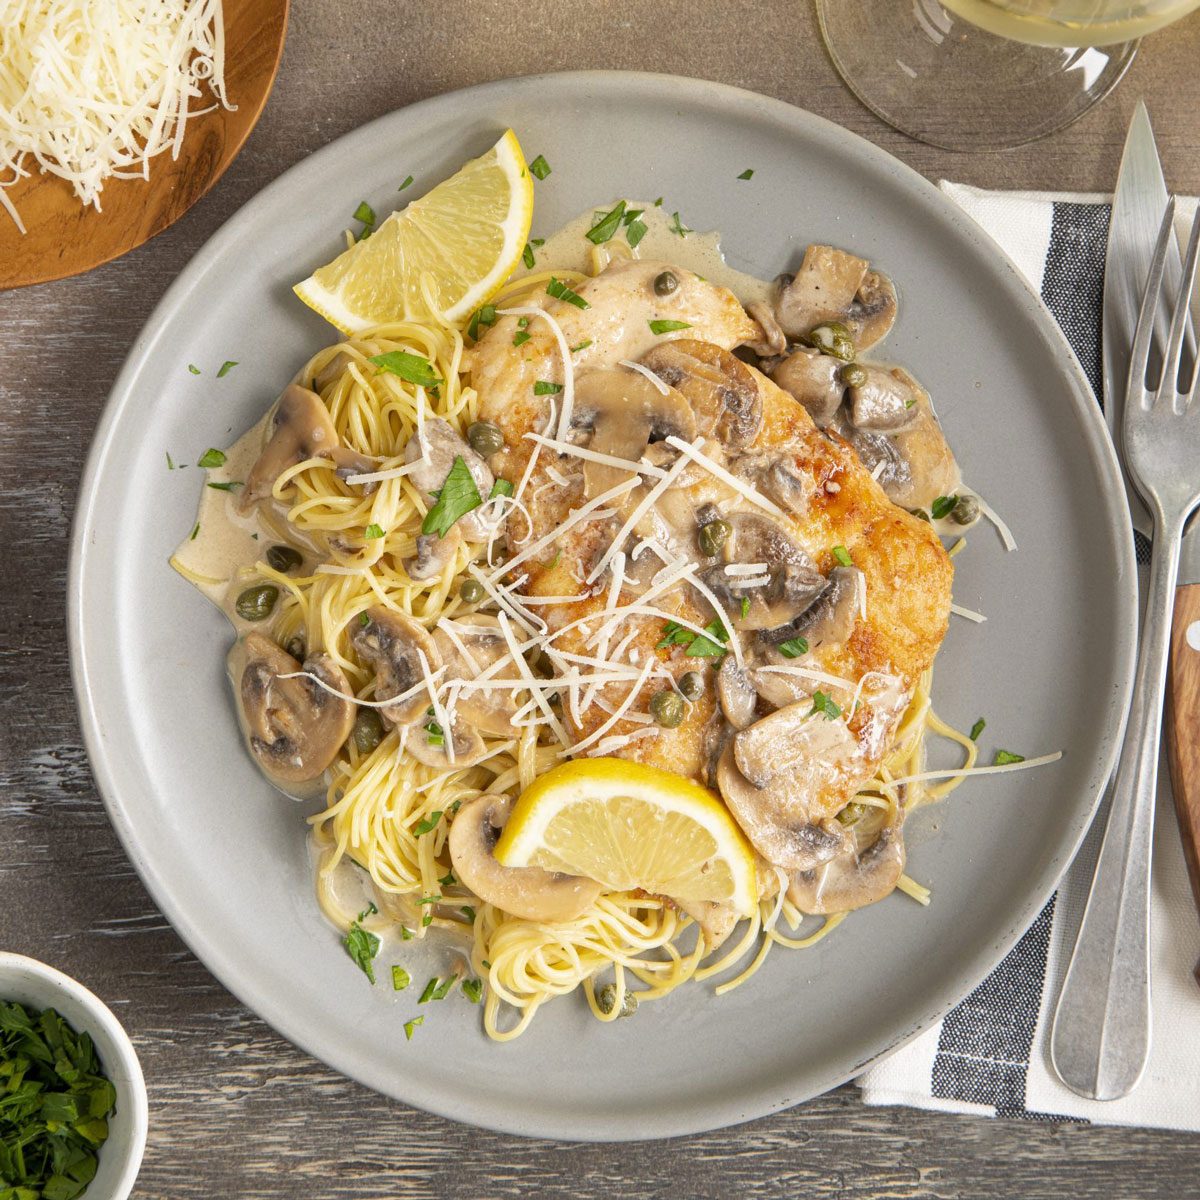 The Cheesecake Factory’s Chicken Piccata